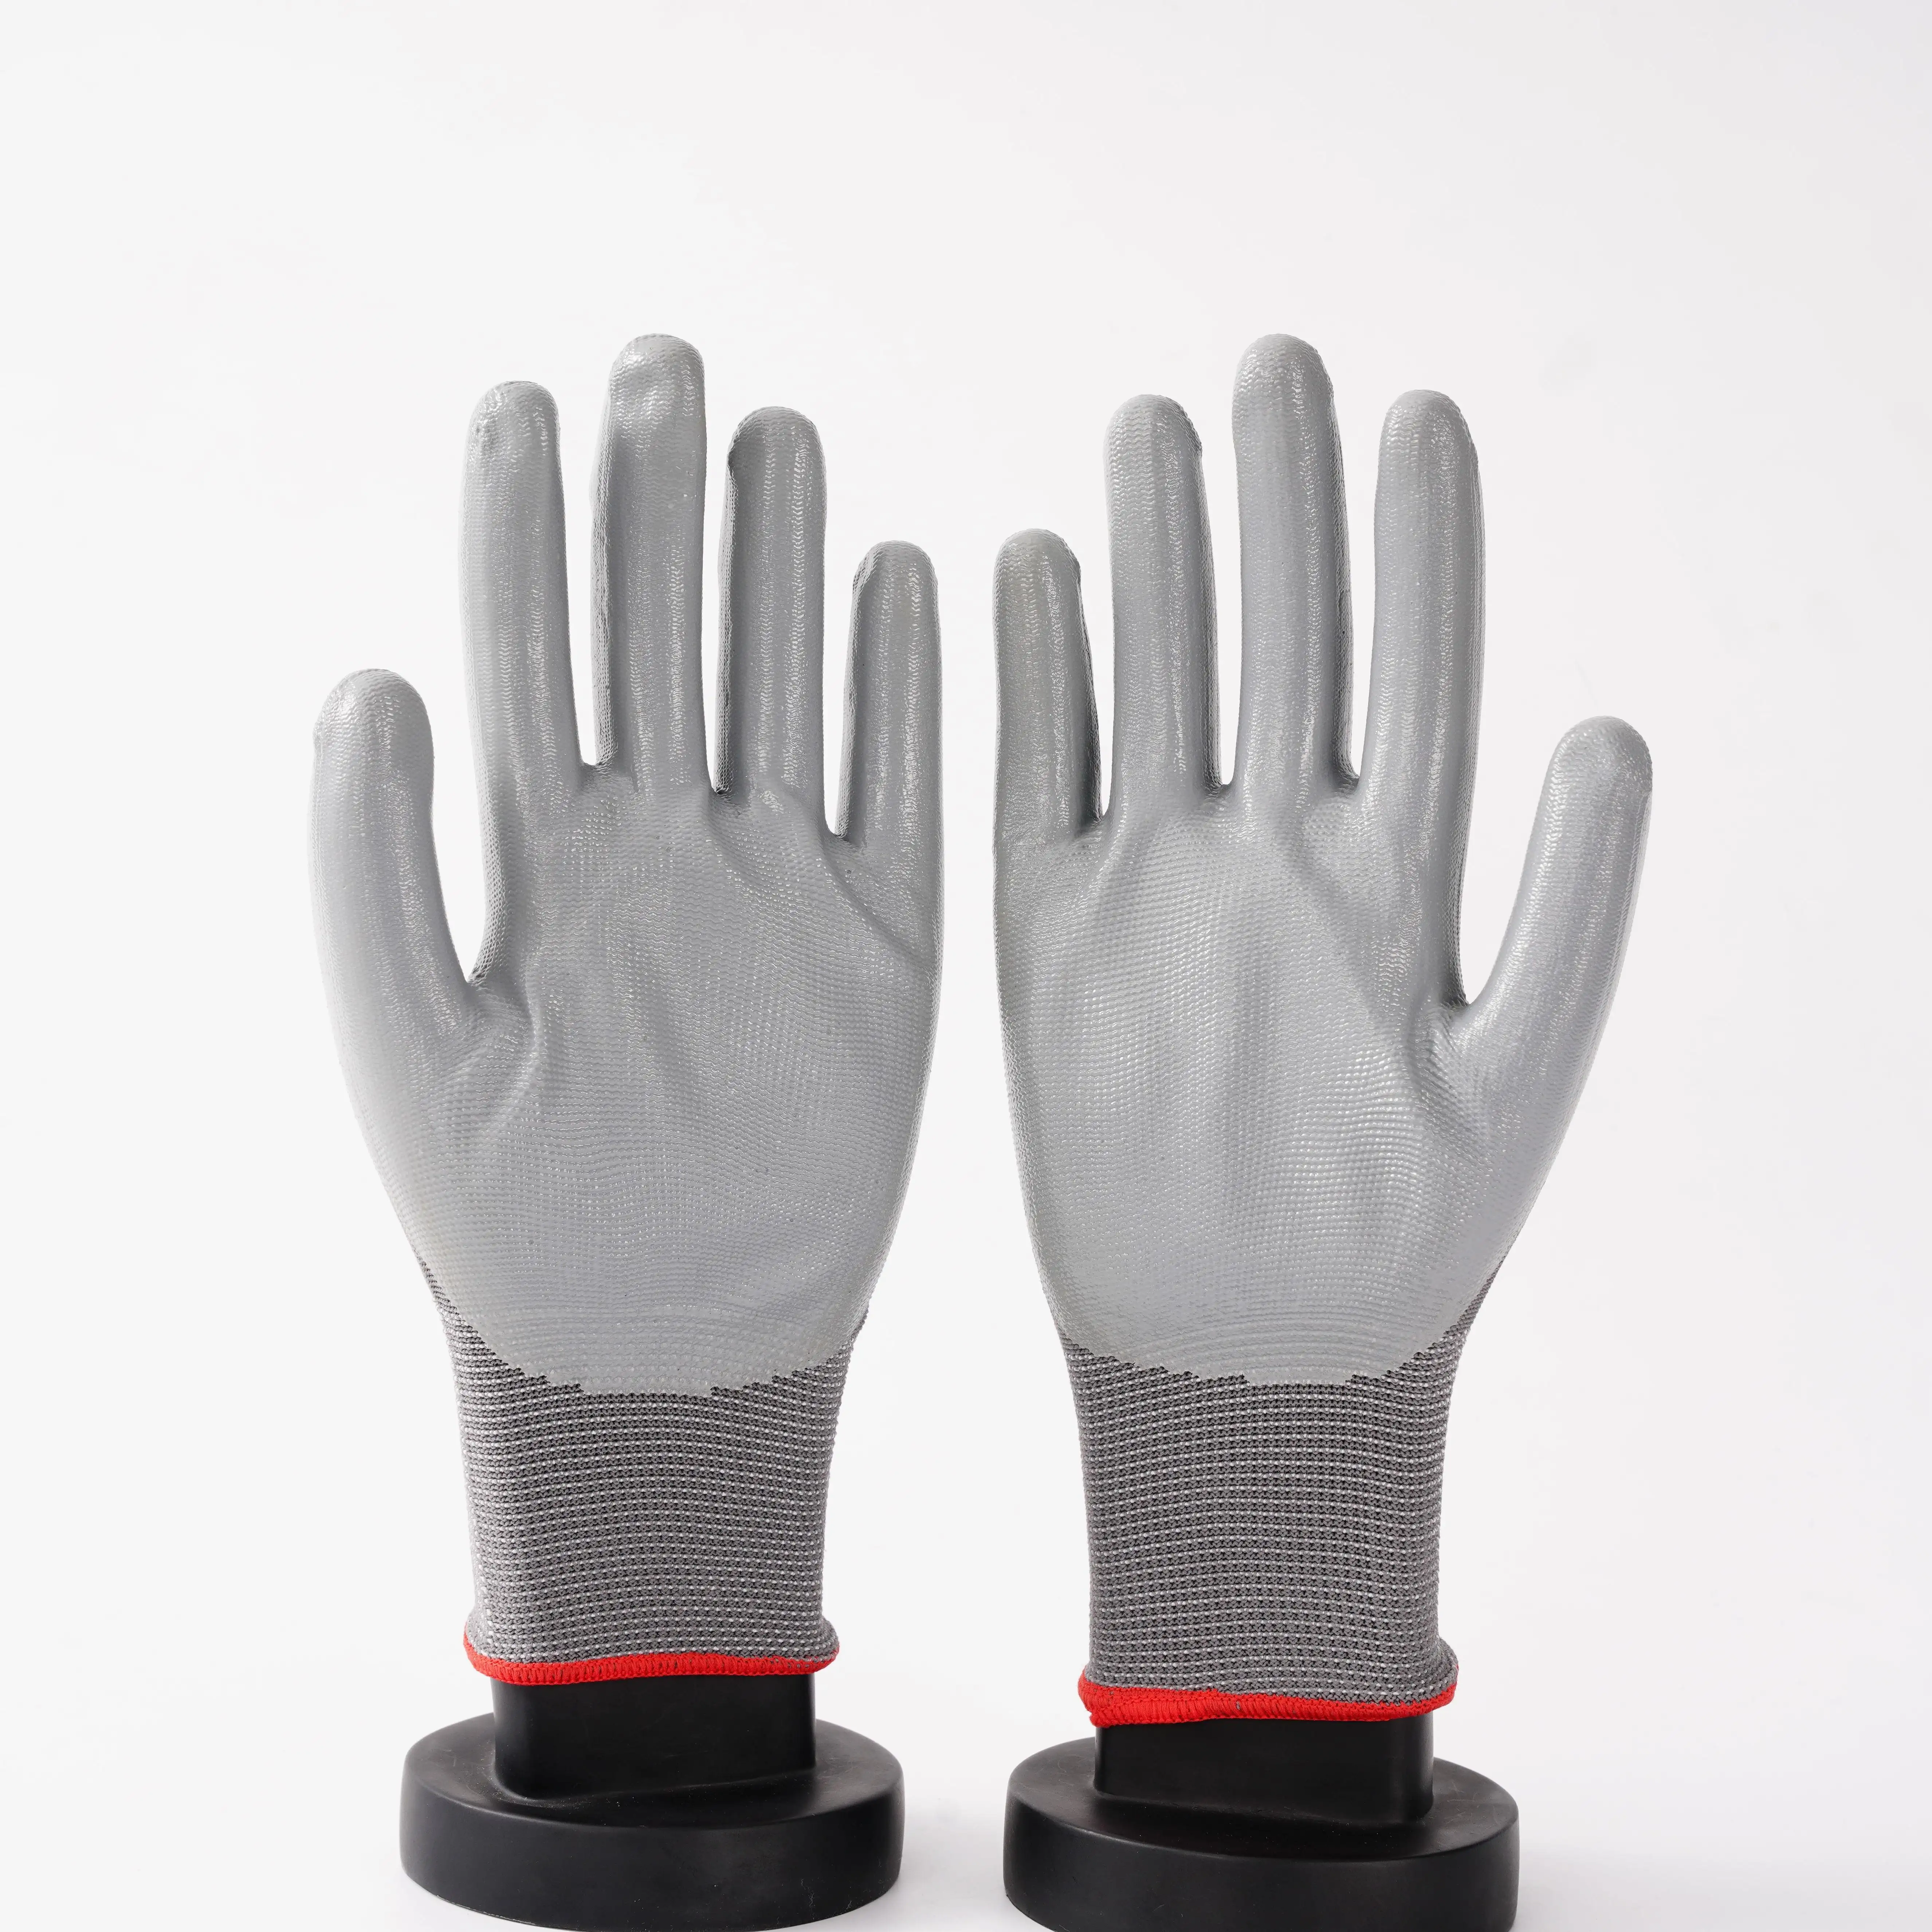 China Factory Seller Medical Gloves With Cotton Liner, Full Dipped In Nitrile Coated Glove